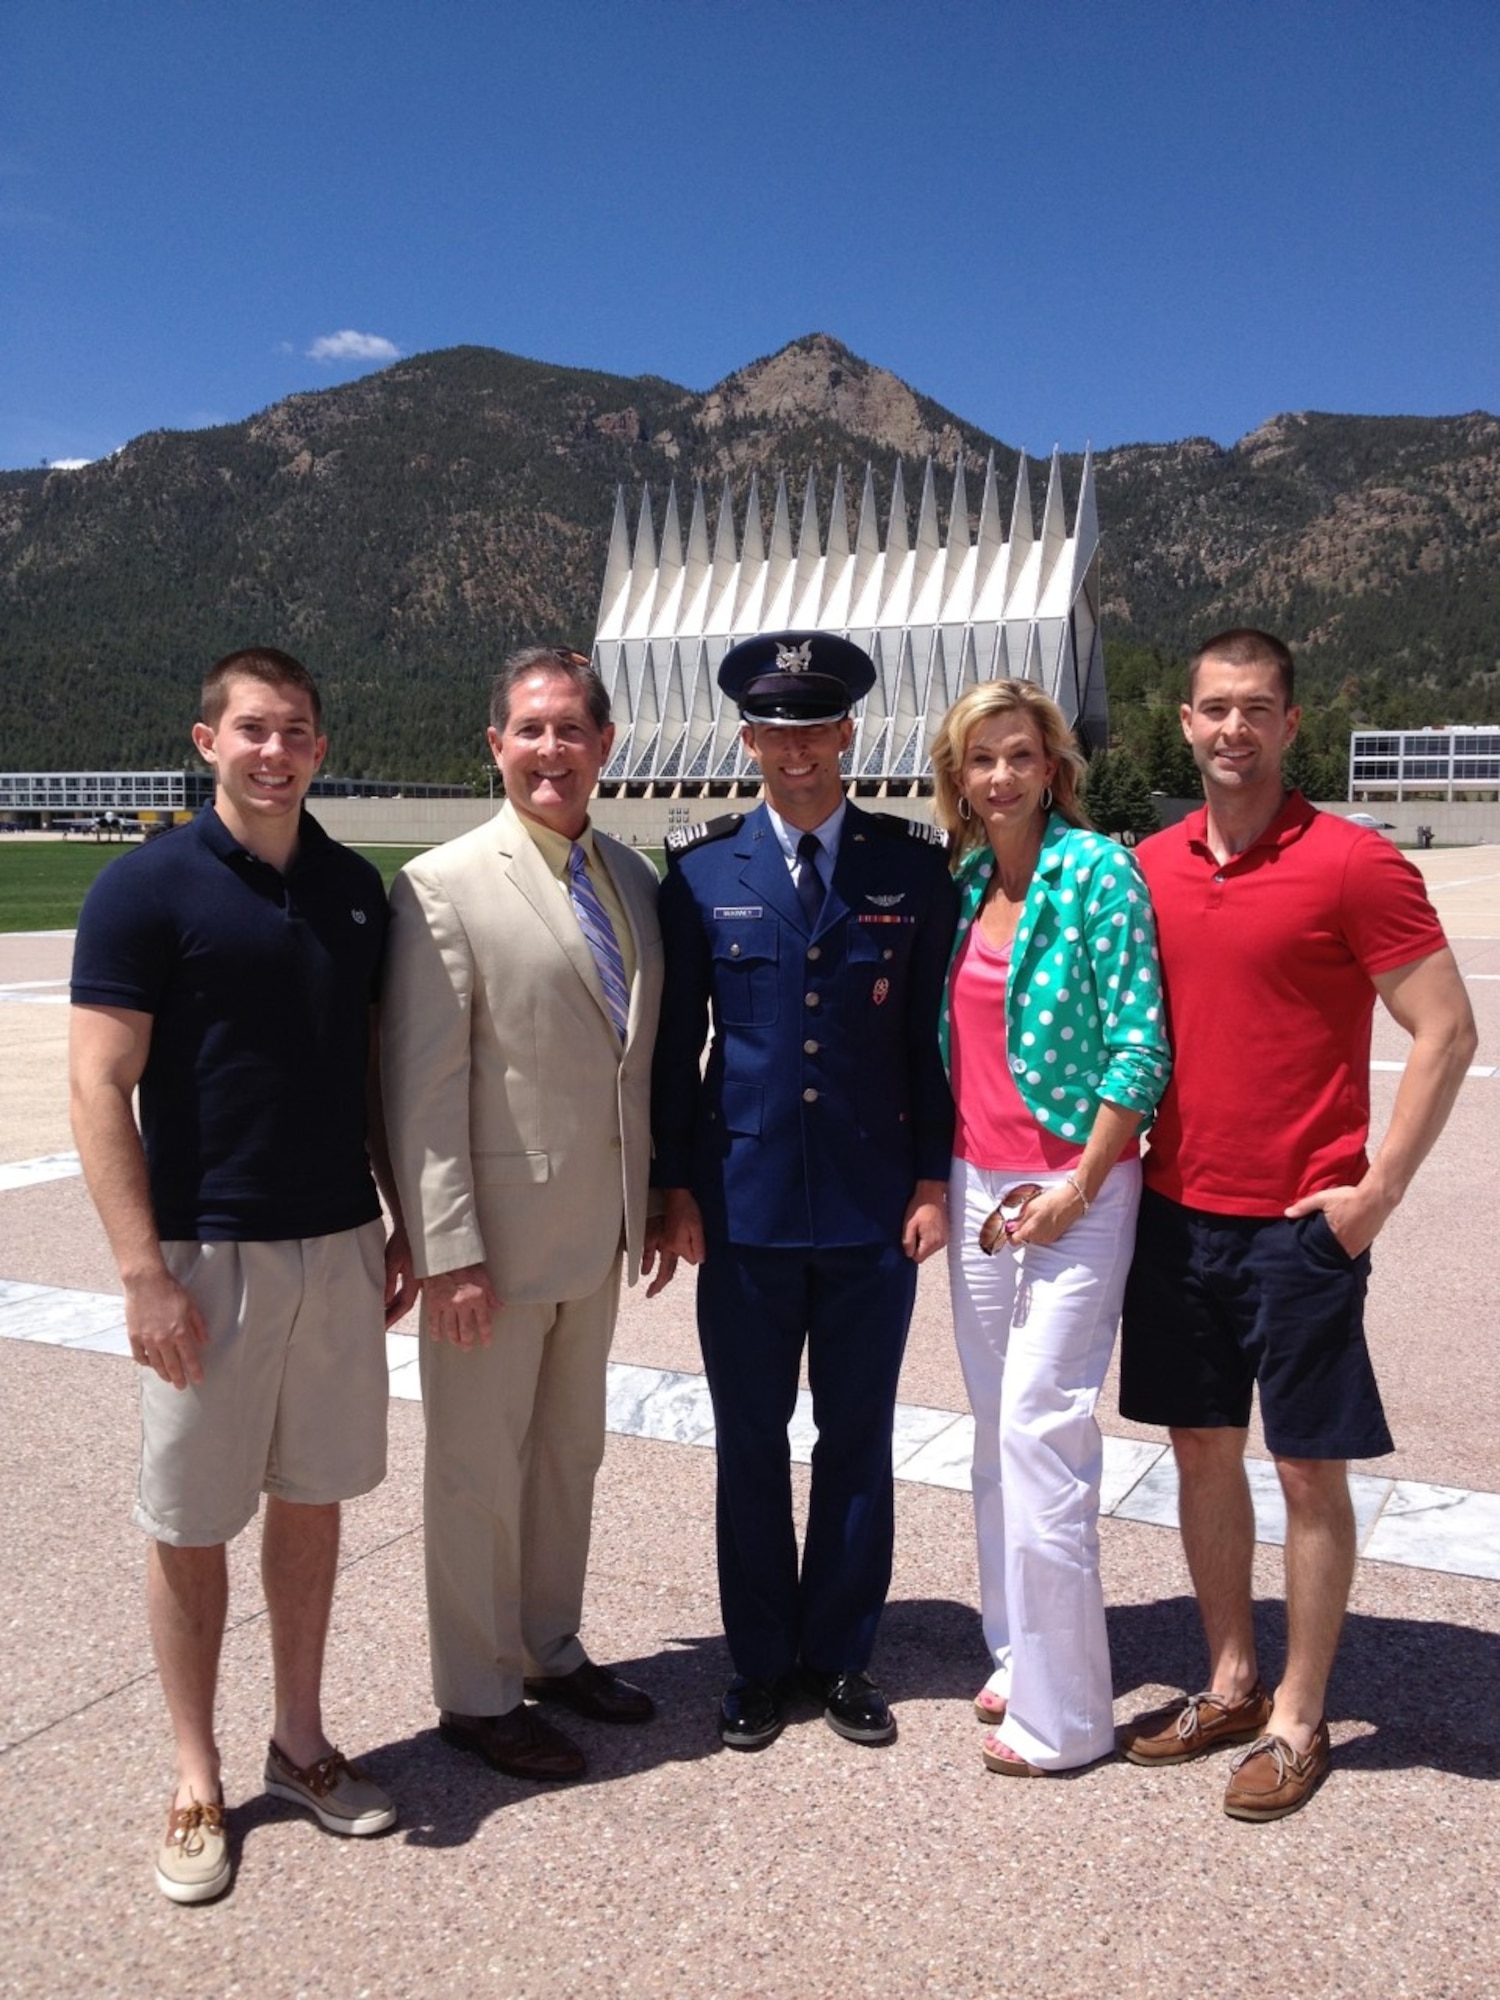 Blaine and Becky McKinney and their sons Austin, Connor and Lucas at the Air Force Academy. The Mckinneys travelled regularly to the Academy to support their sons over more than decade-long period. (Courtesy Photo)